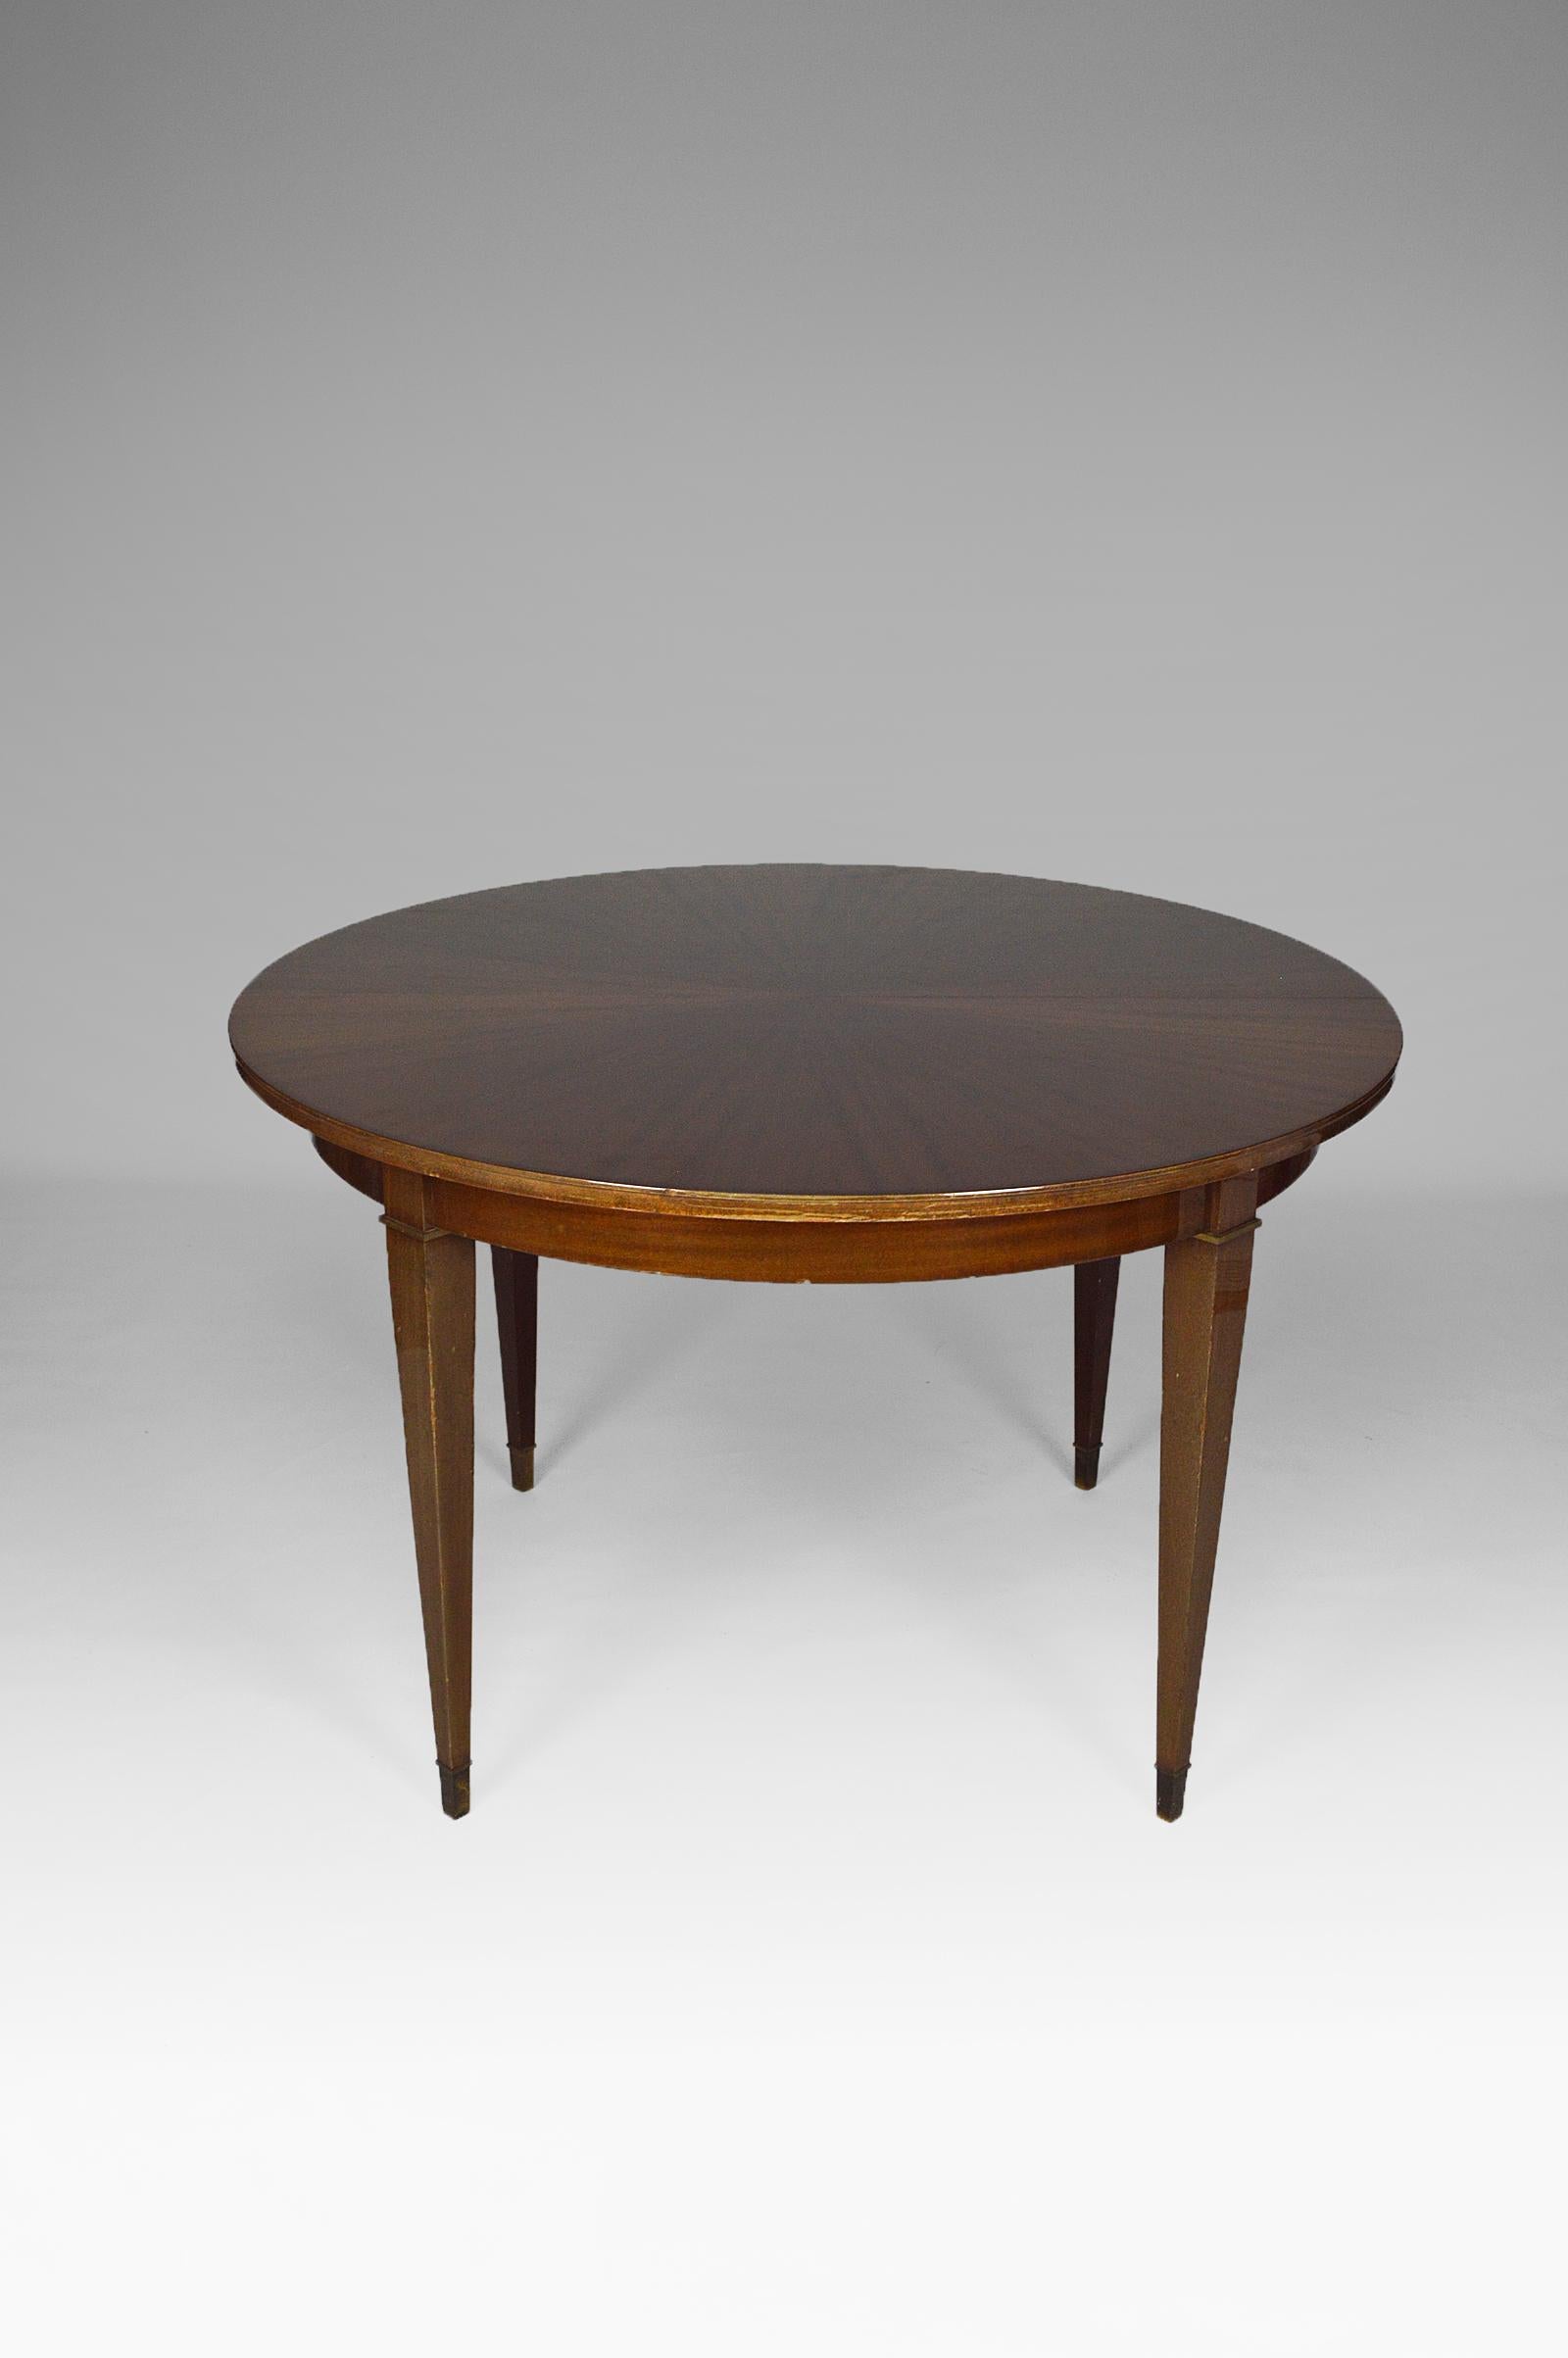 Beautiful round dining table with extensions, in solid and veneered mahogany. 

The table top is in veneered mahogany with a 